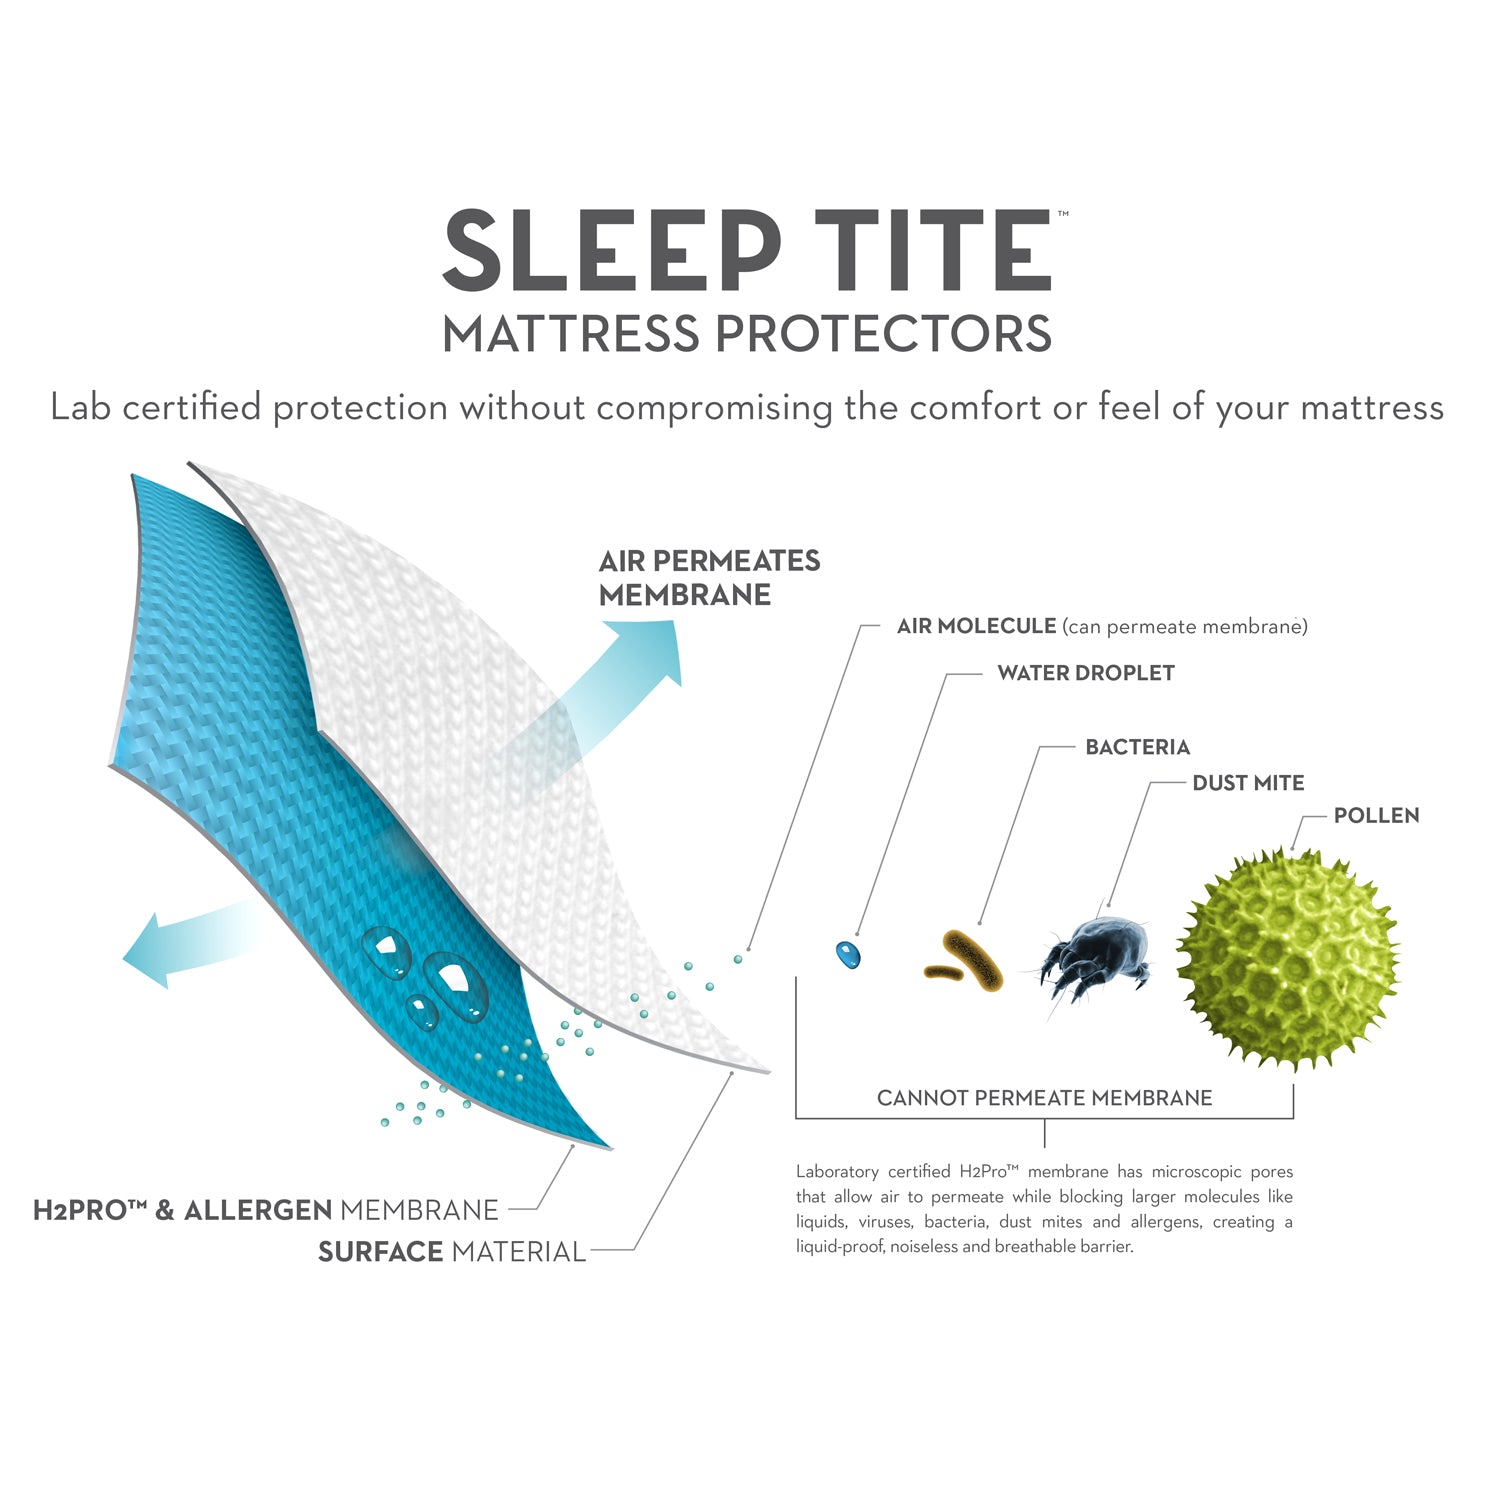 Sleep Tite 5 Side Graphic of Product Layers & Protection